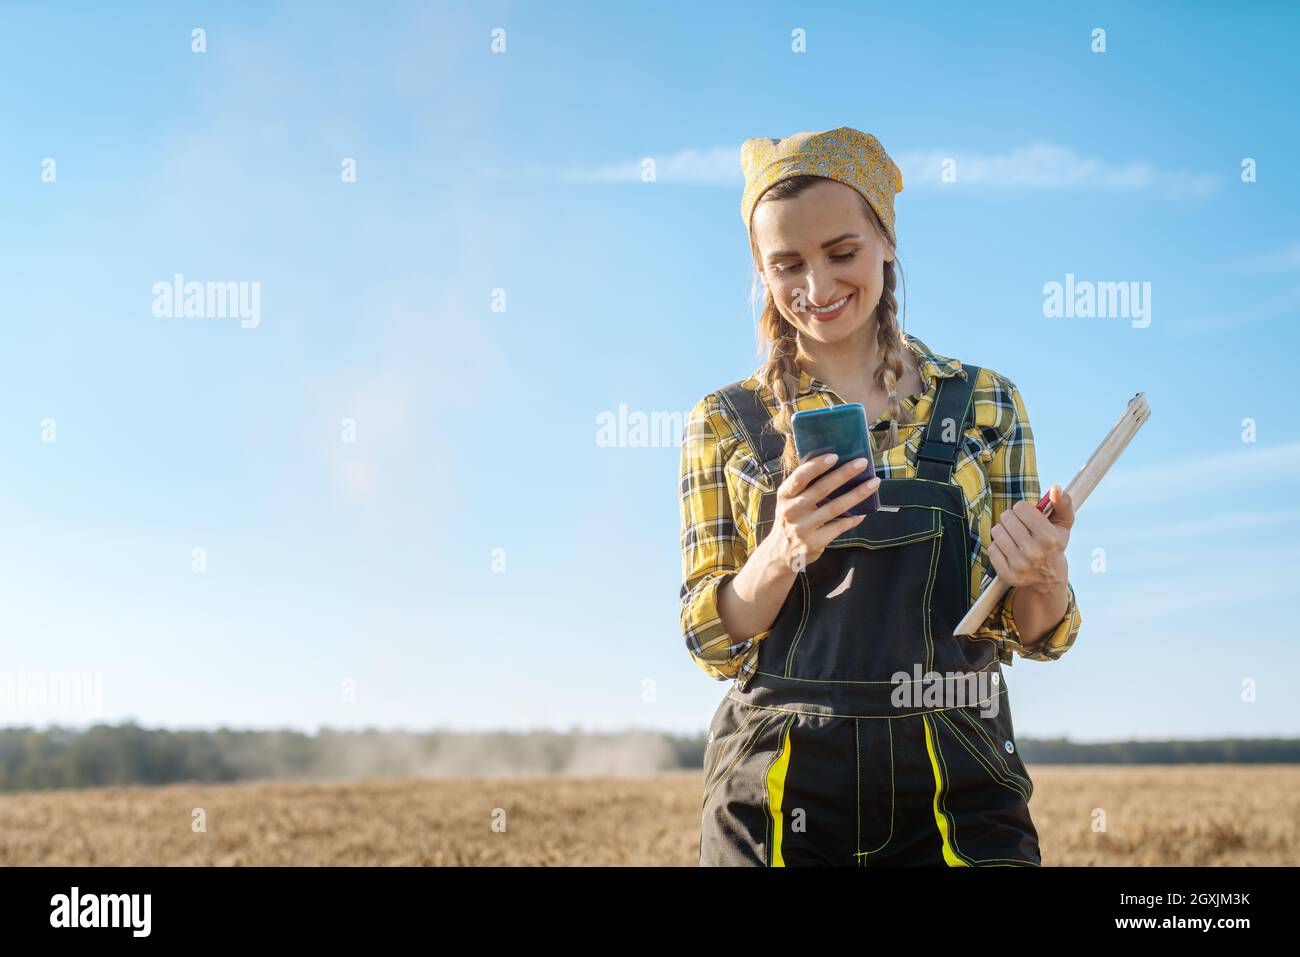 Farmer using her phone on a grain field during harvest Stock Photo